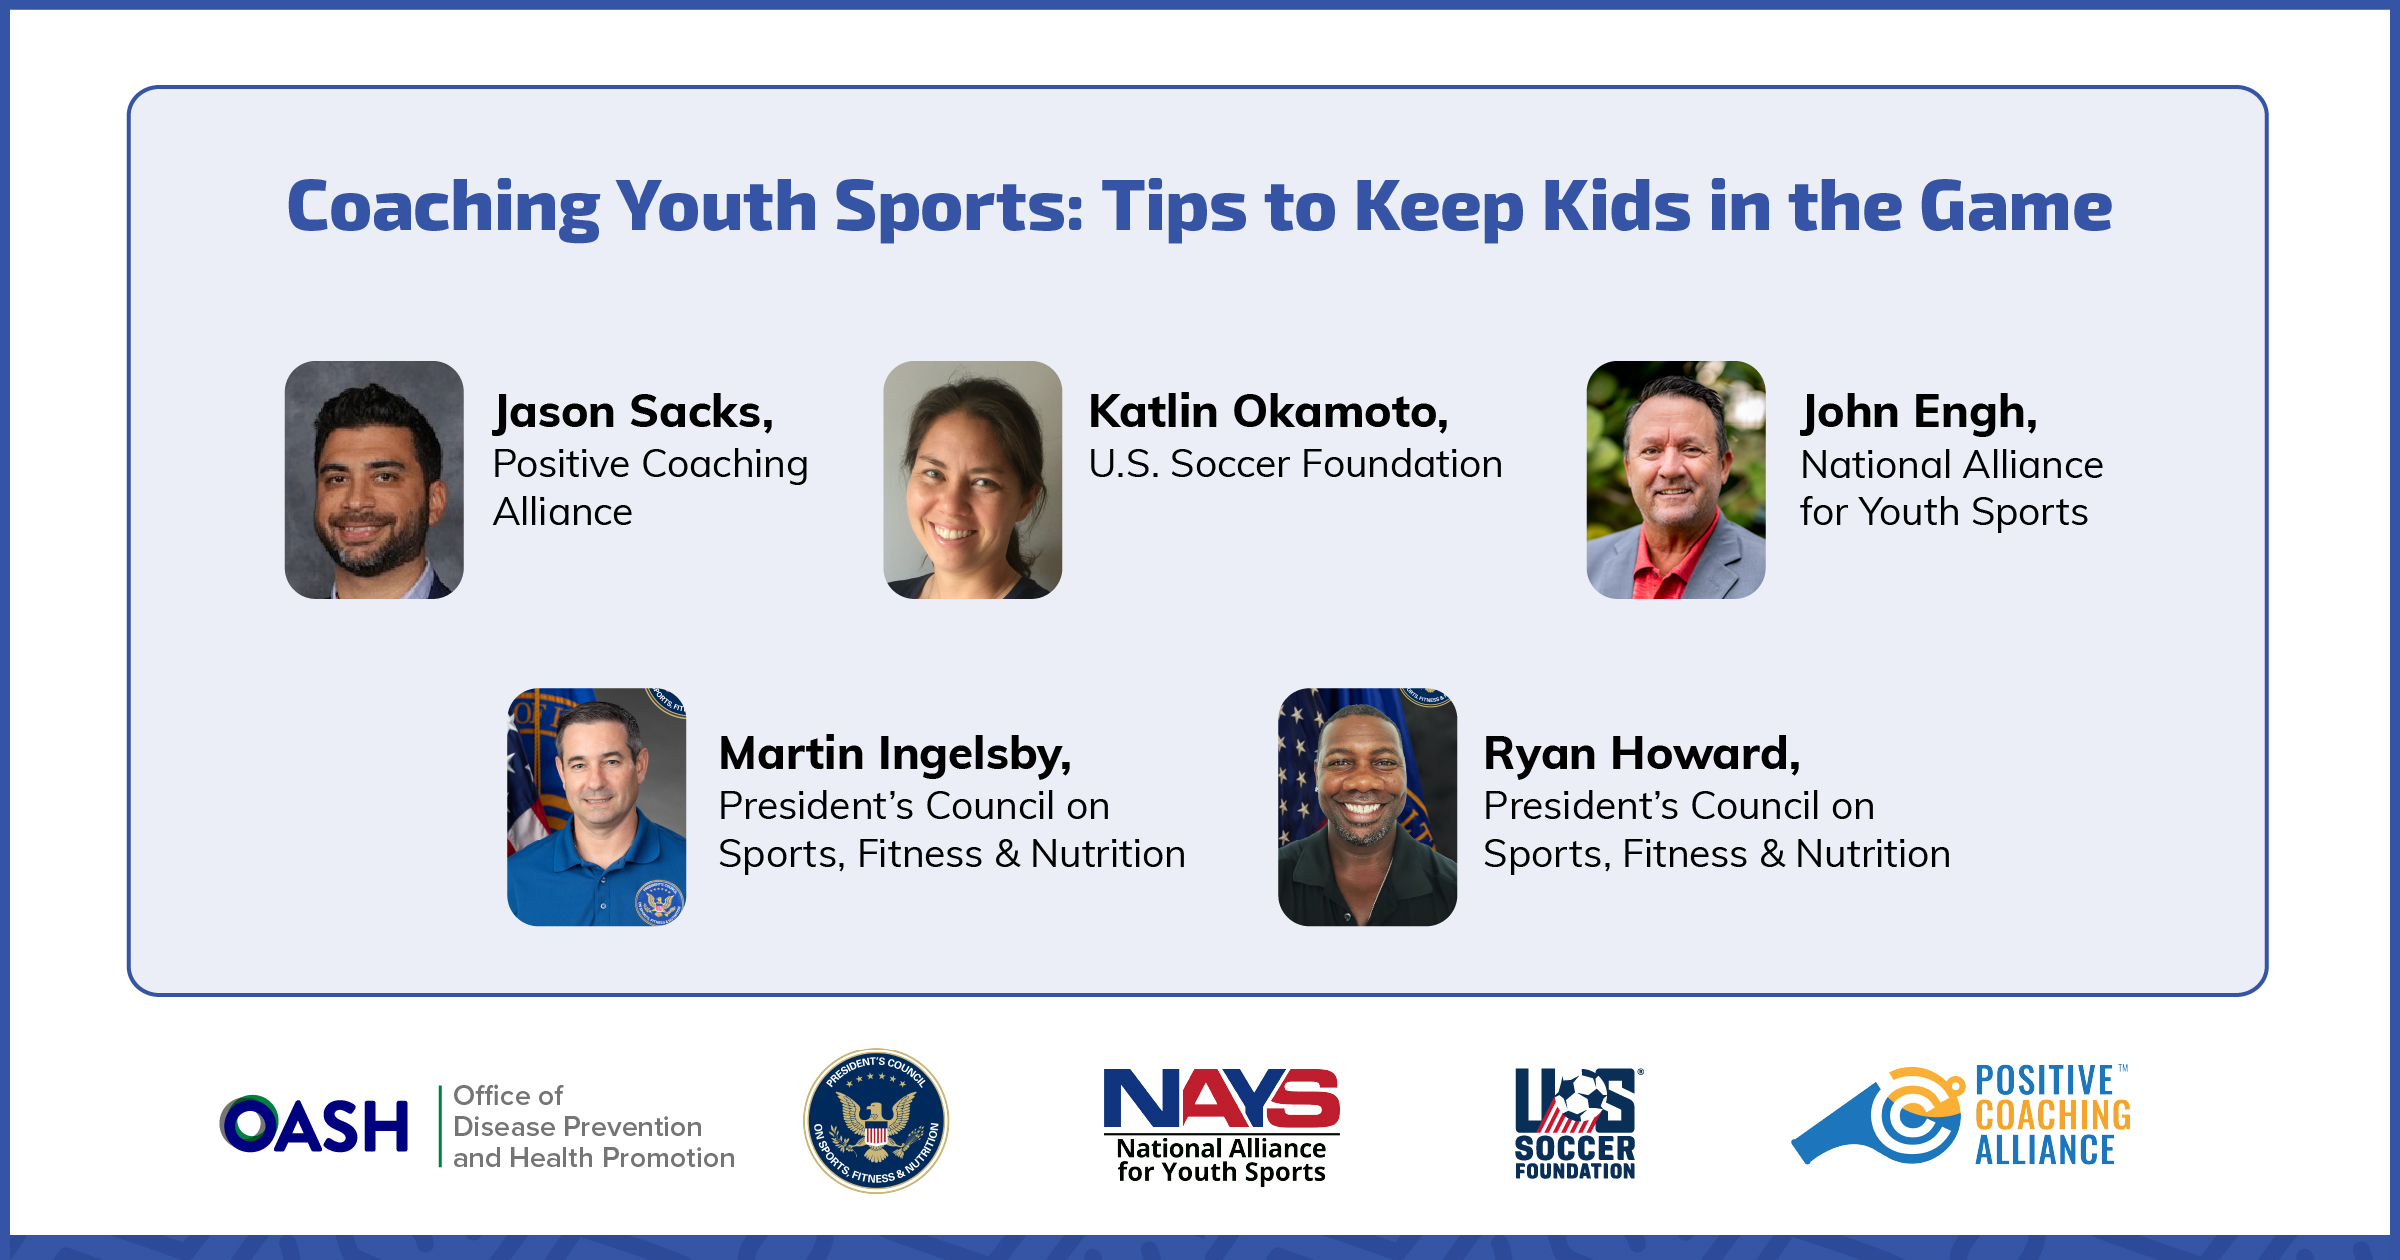 Title reads: Coaching Youth Sports: Tips to Keep Kids in the Game. Below the title are 5 headshots of the panelists. 